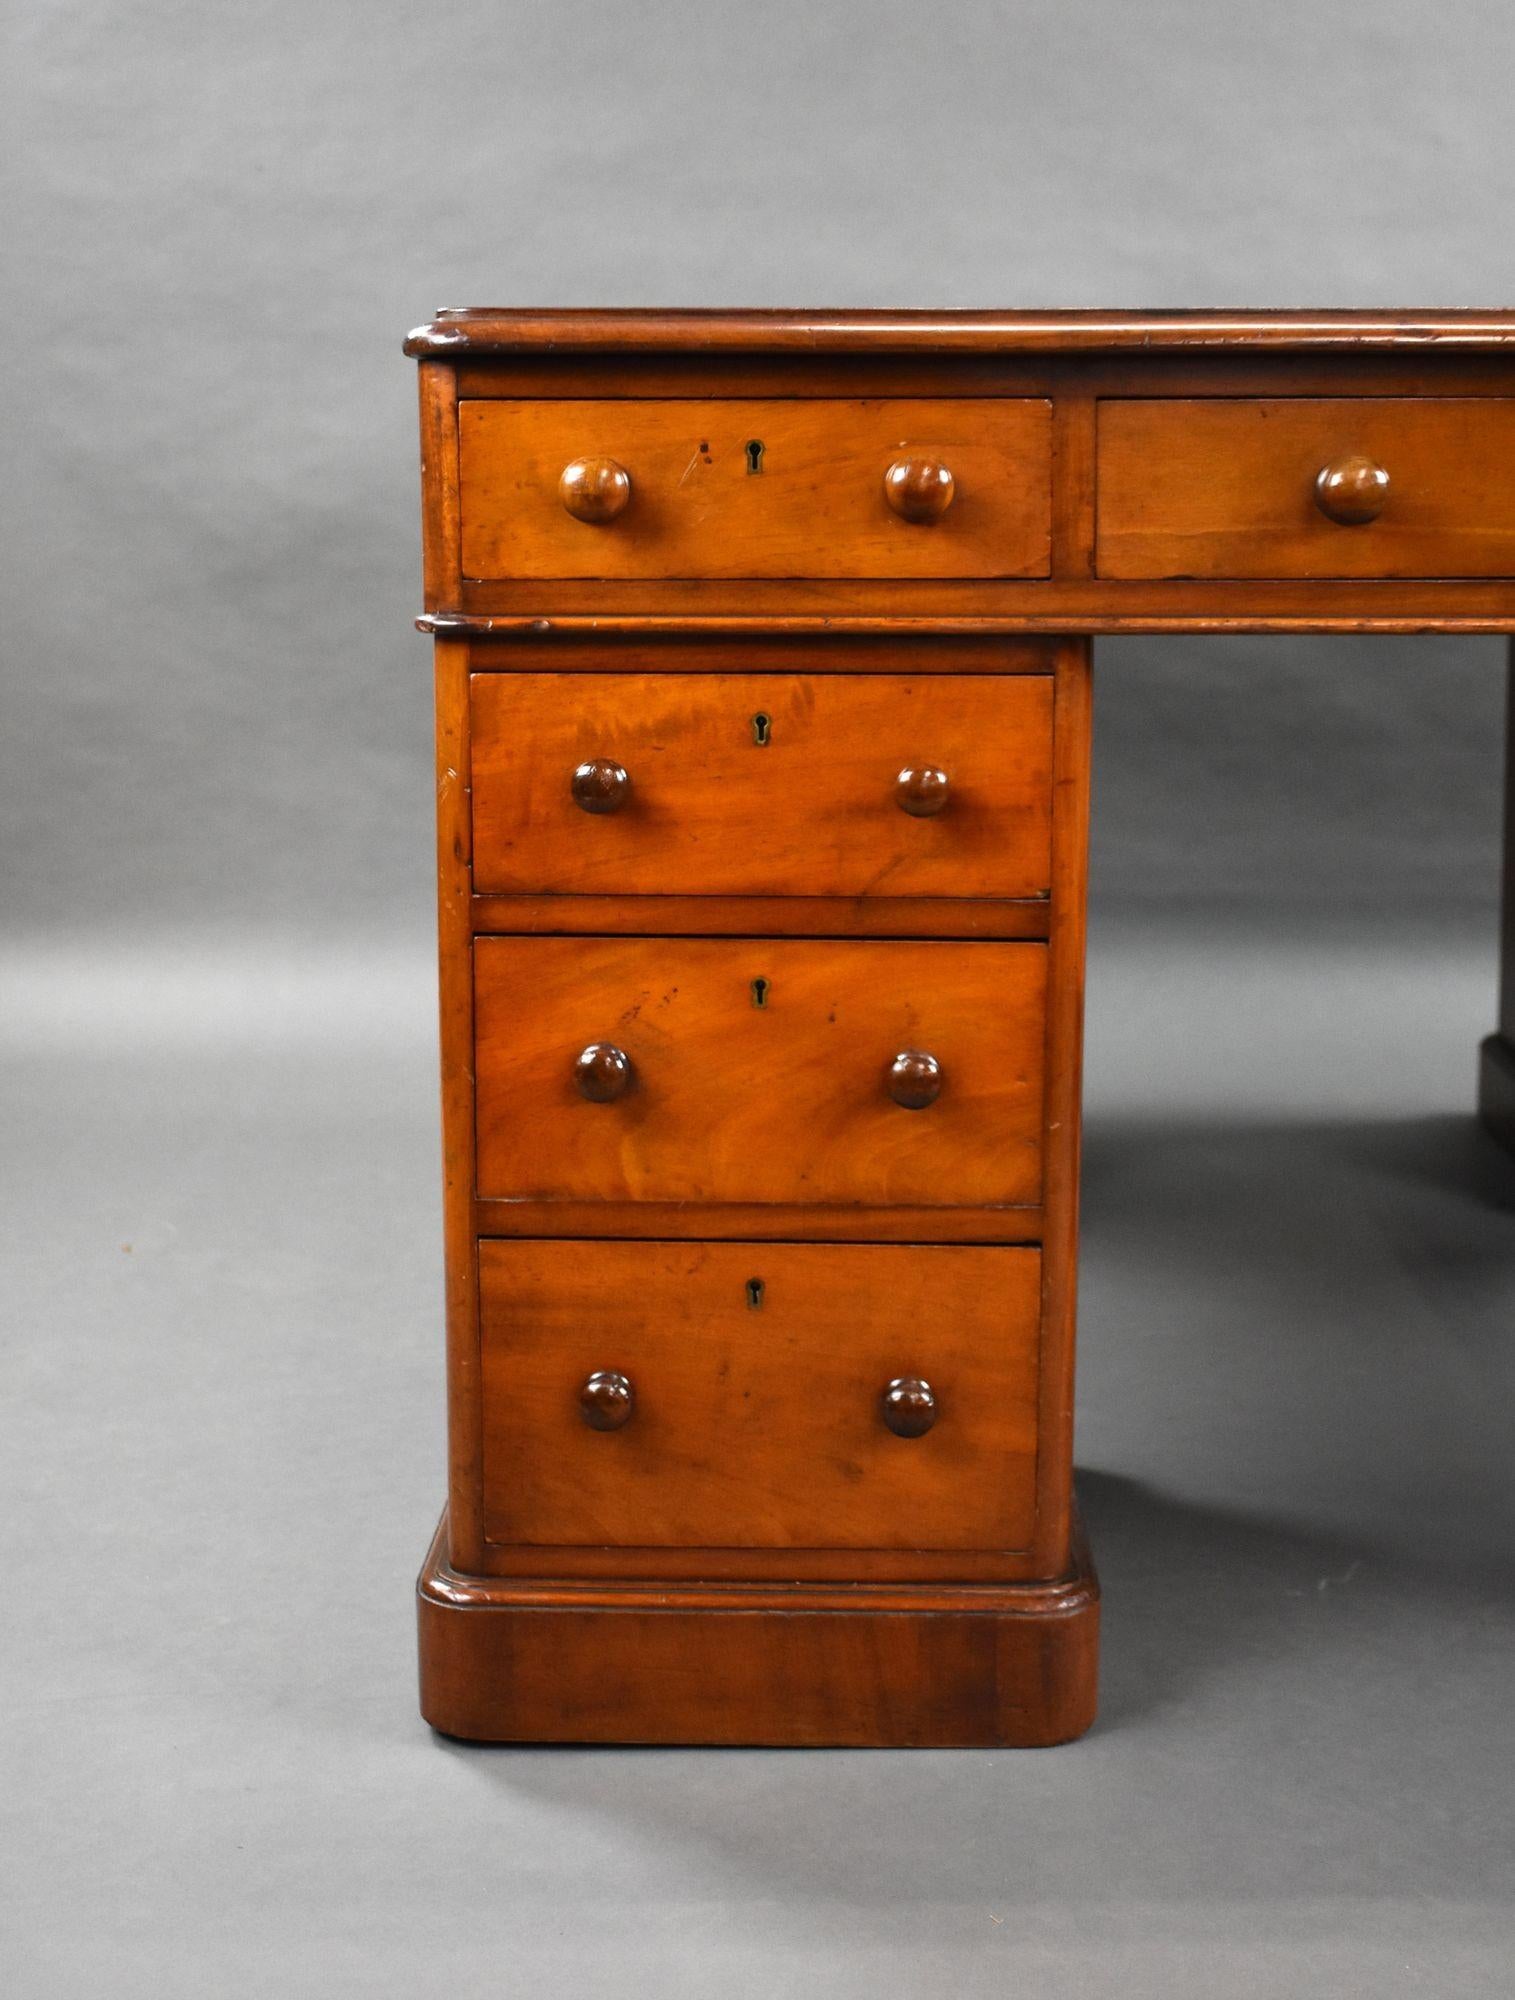 For sale is an unusual, good quality, Victorian mahogany partners desk. Having a polished solid mahogany top with three drawers to the front and a further three drawers on the opposing side, supported by four pedestals, the front of which have an